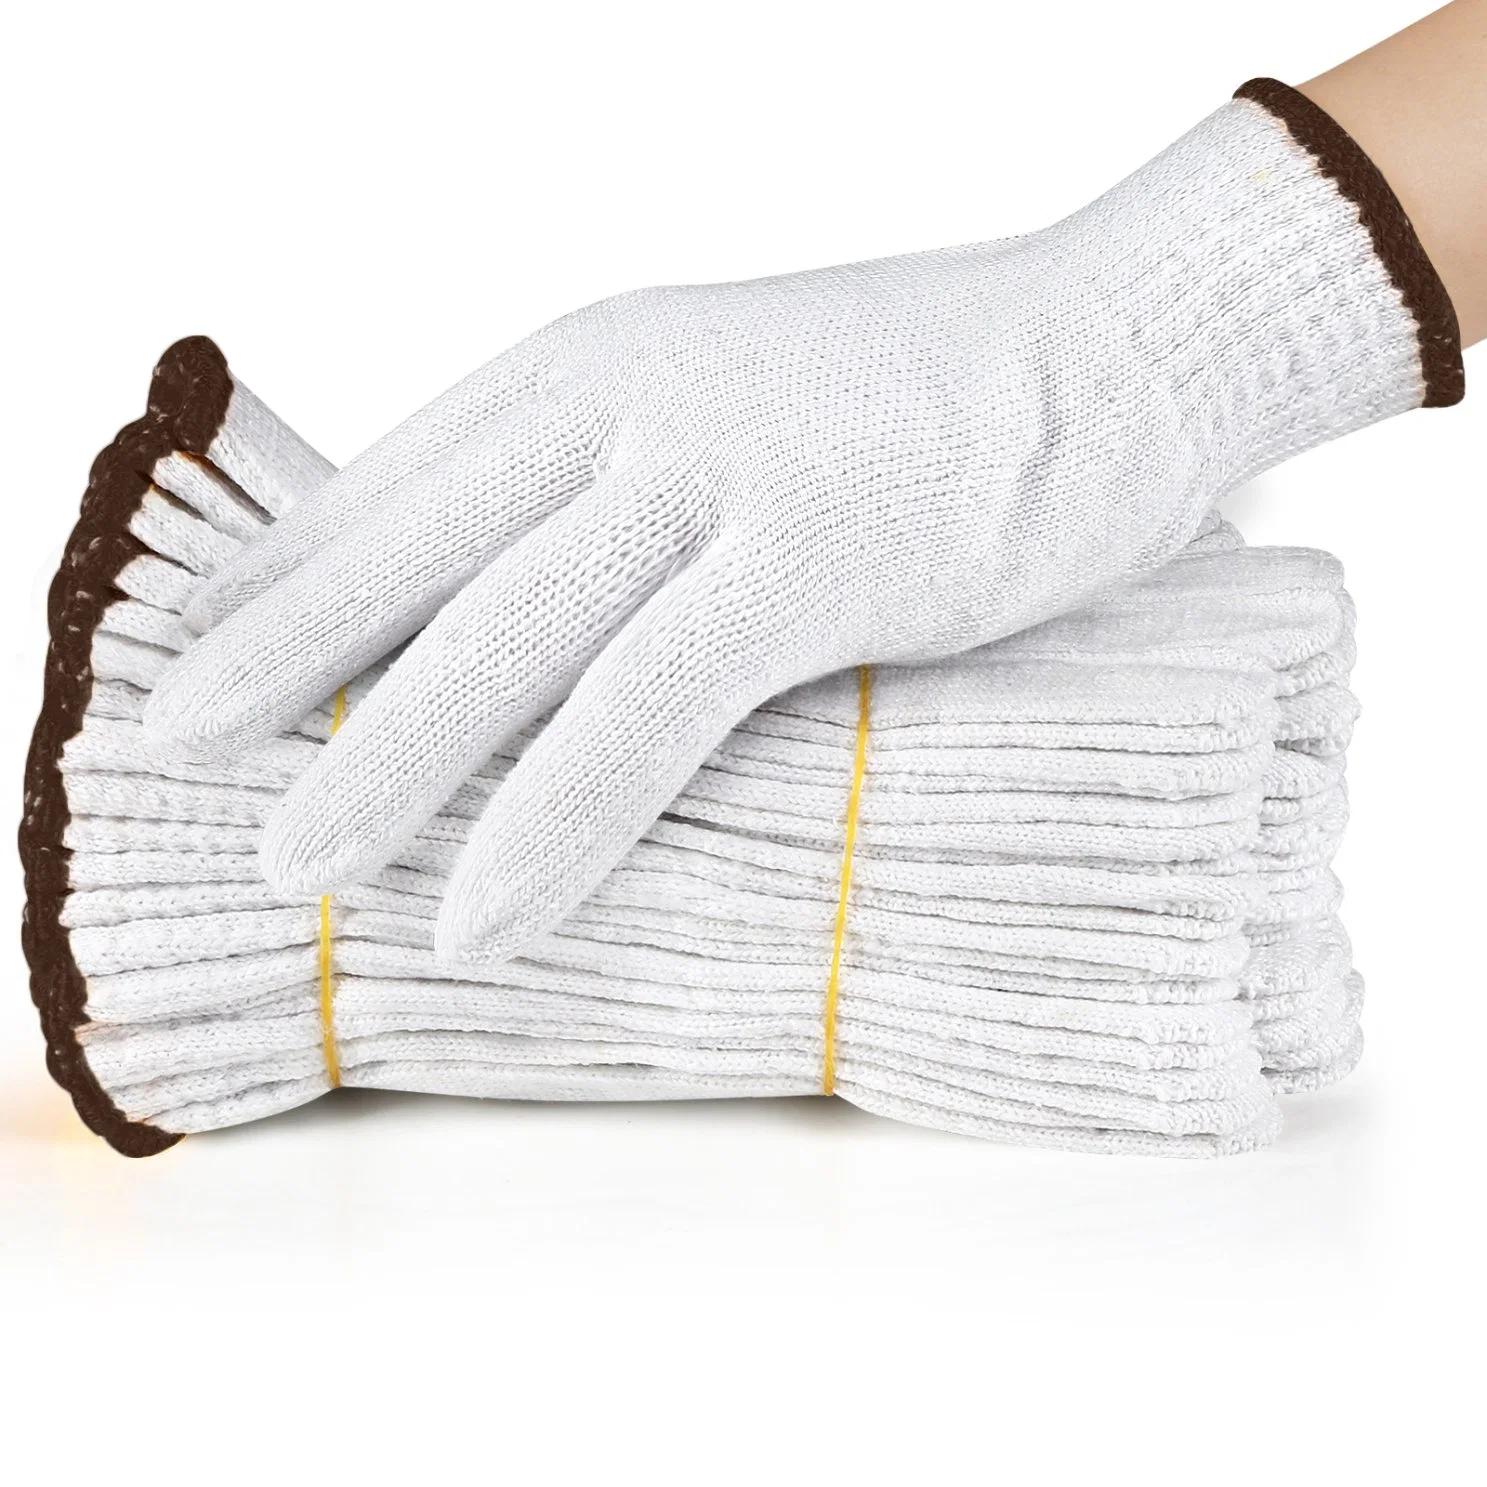 China Price Wholesale/Supplier 30g-80g/Pair Industrial/Constrcution/Garden Working Guantes Safety Work Knitted Cotton Gloves